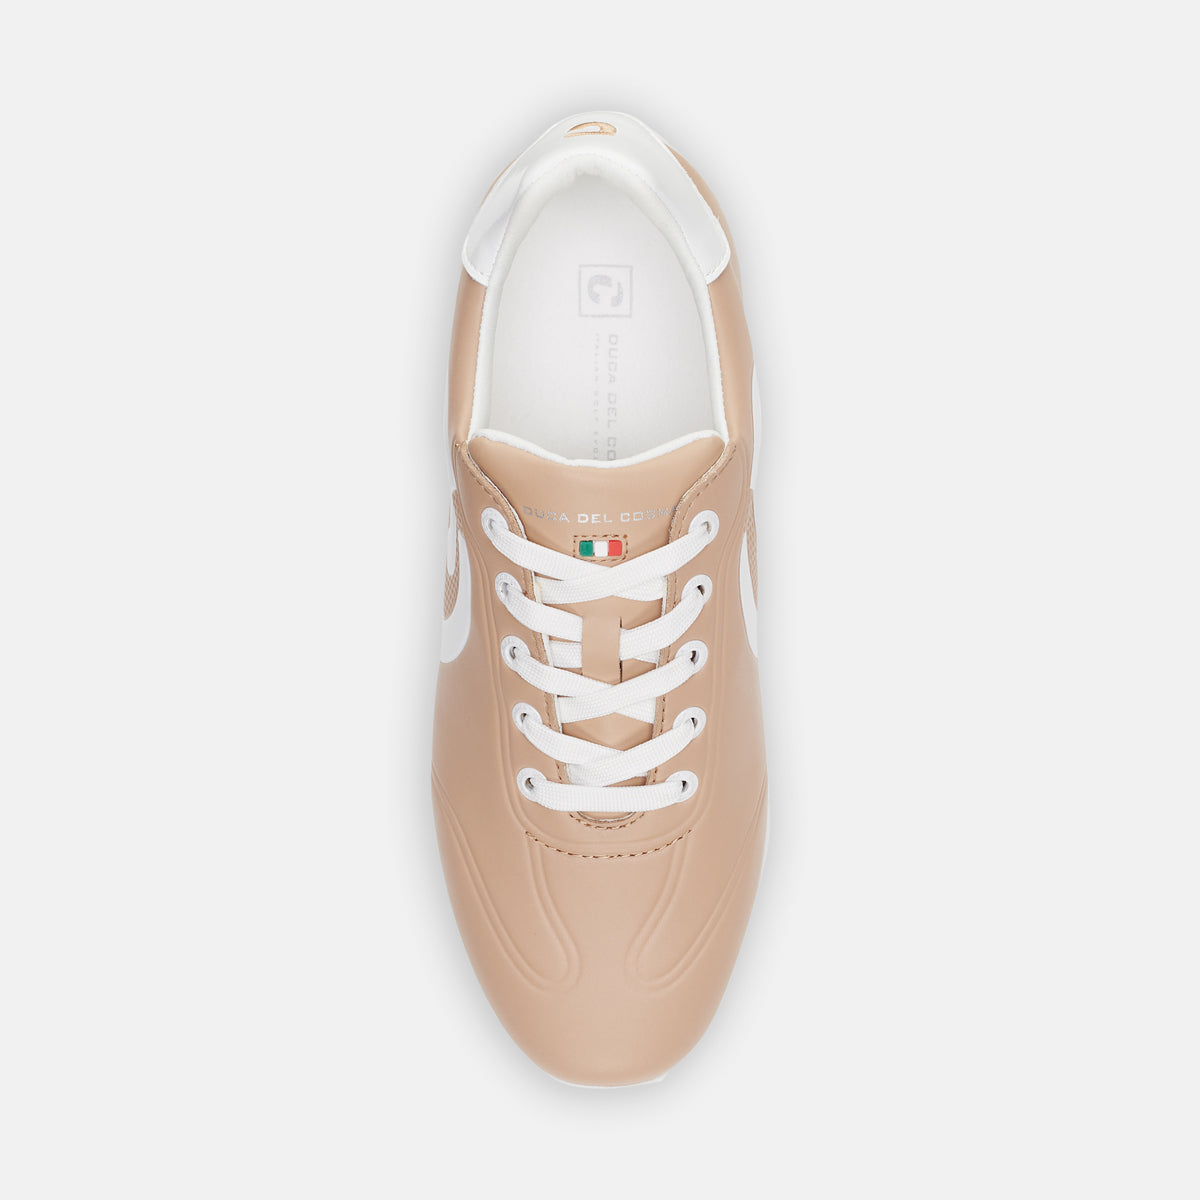 Queenscup Champagne/White - Women's Golf Shoe  